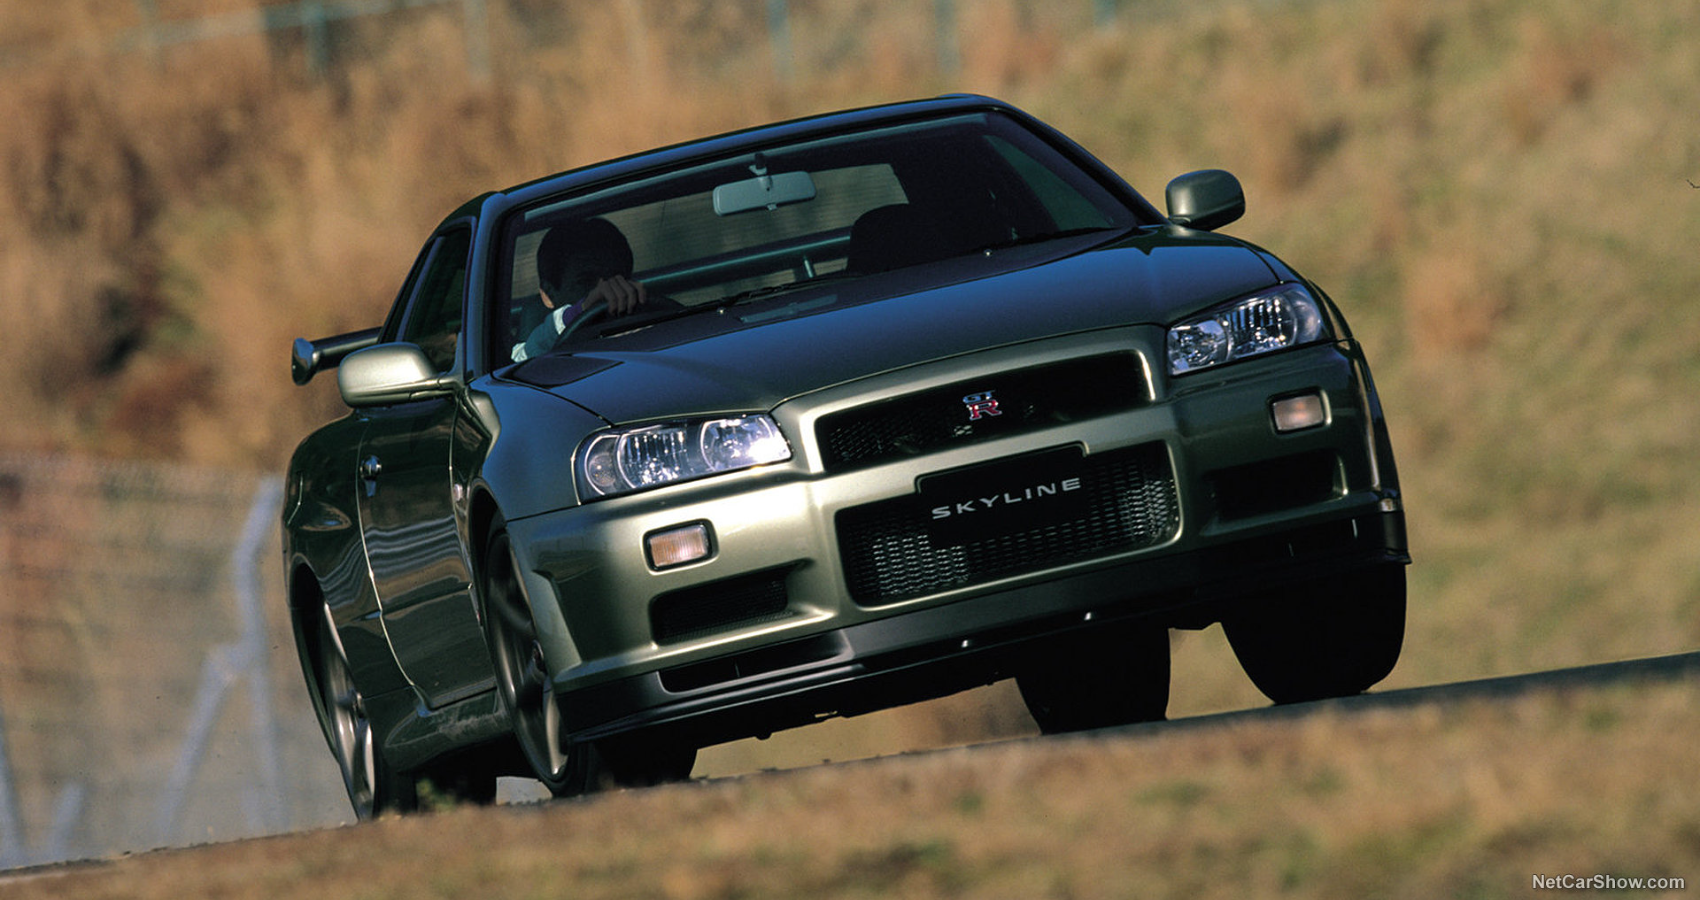 Nissan Skyline in an Action